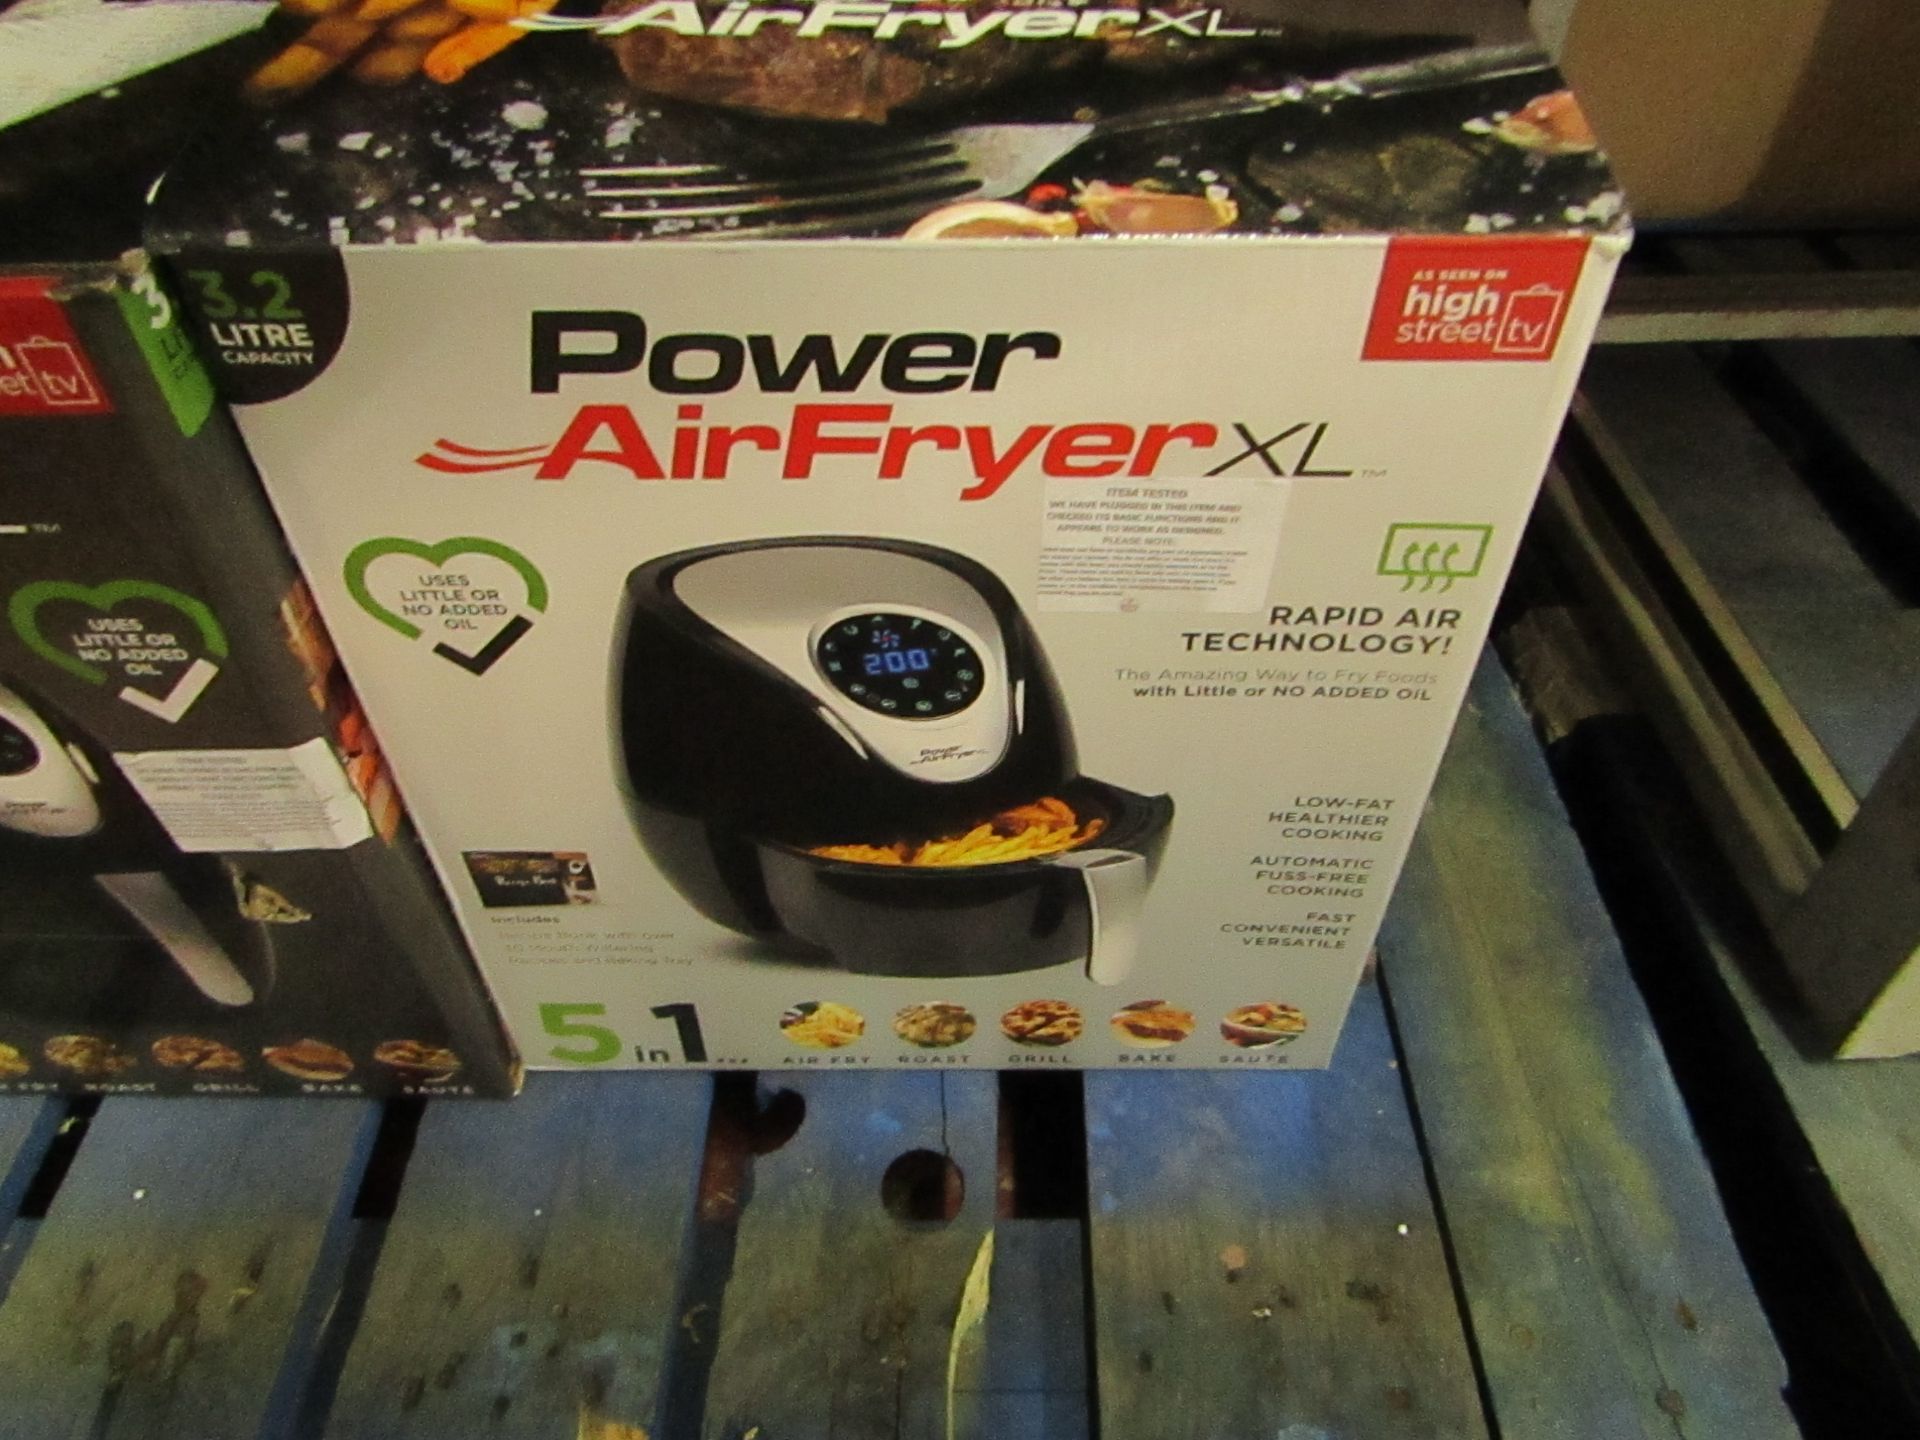 Power Air Fryer Black 3.2L Express, tested working and boxed - unchecked for accessories |SKU